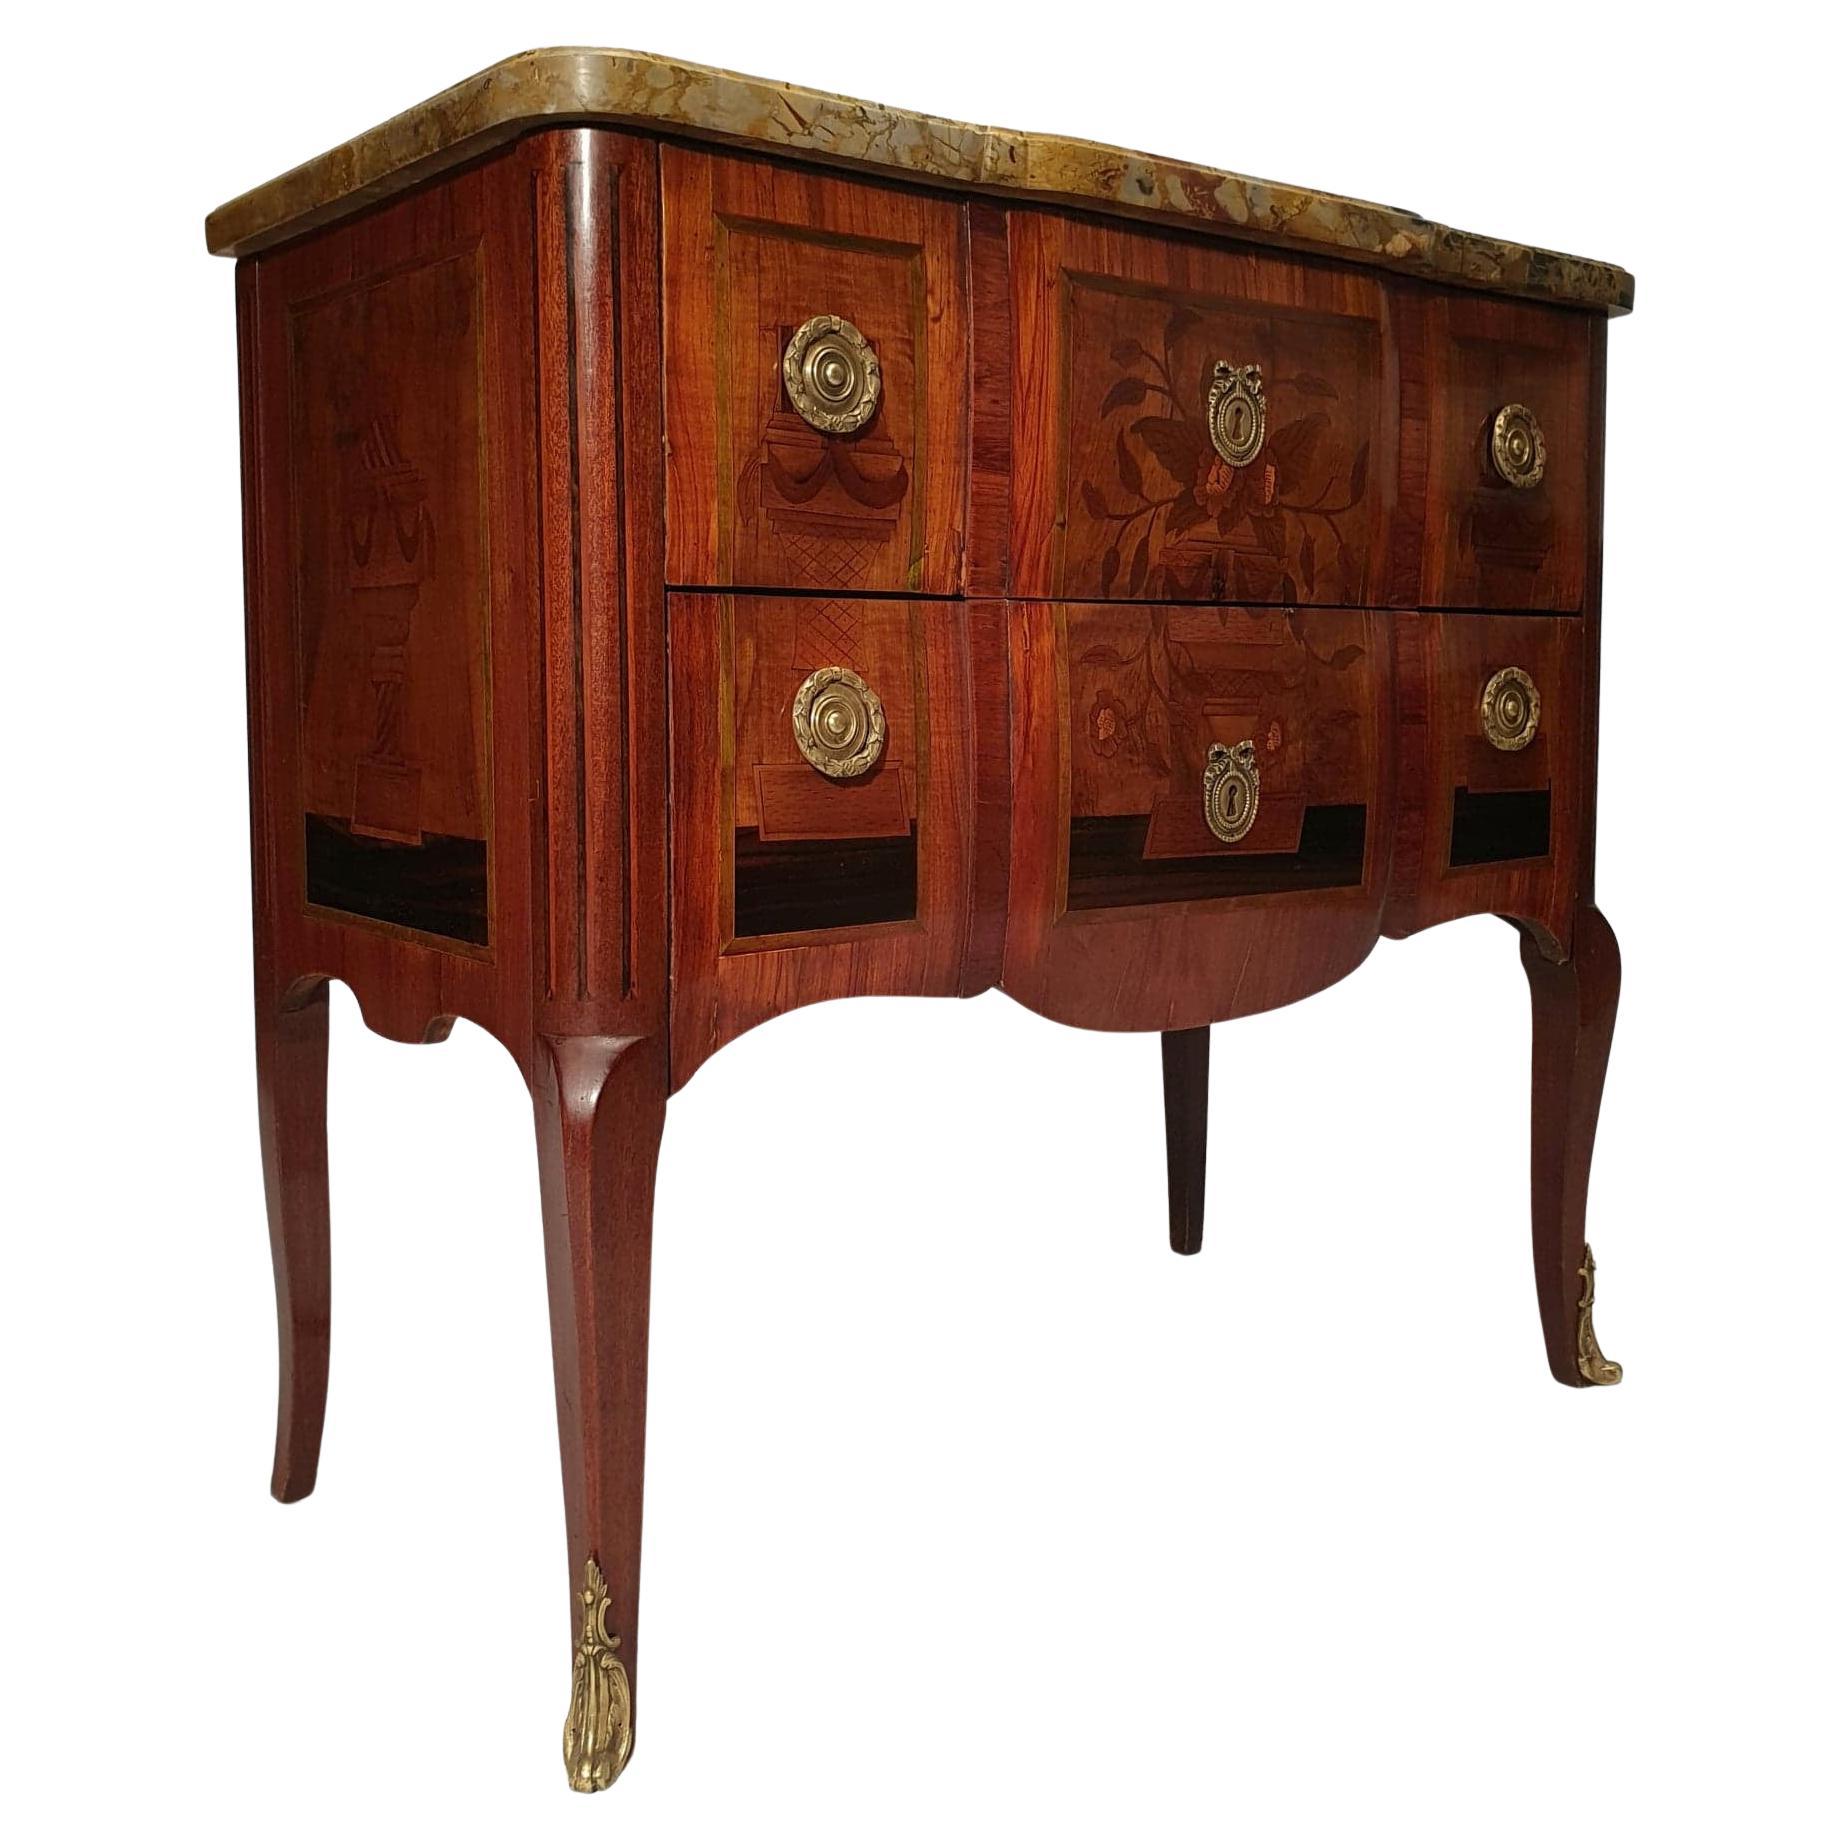 Transition Style Commode, Floral Marquetry, Rosewood, 19th Century